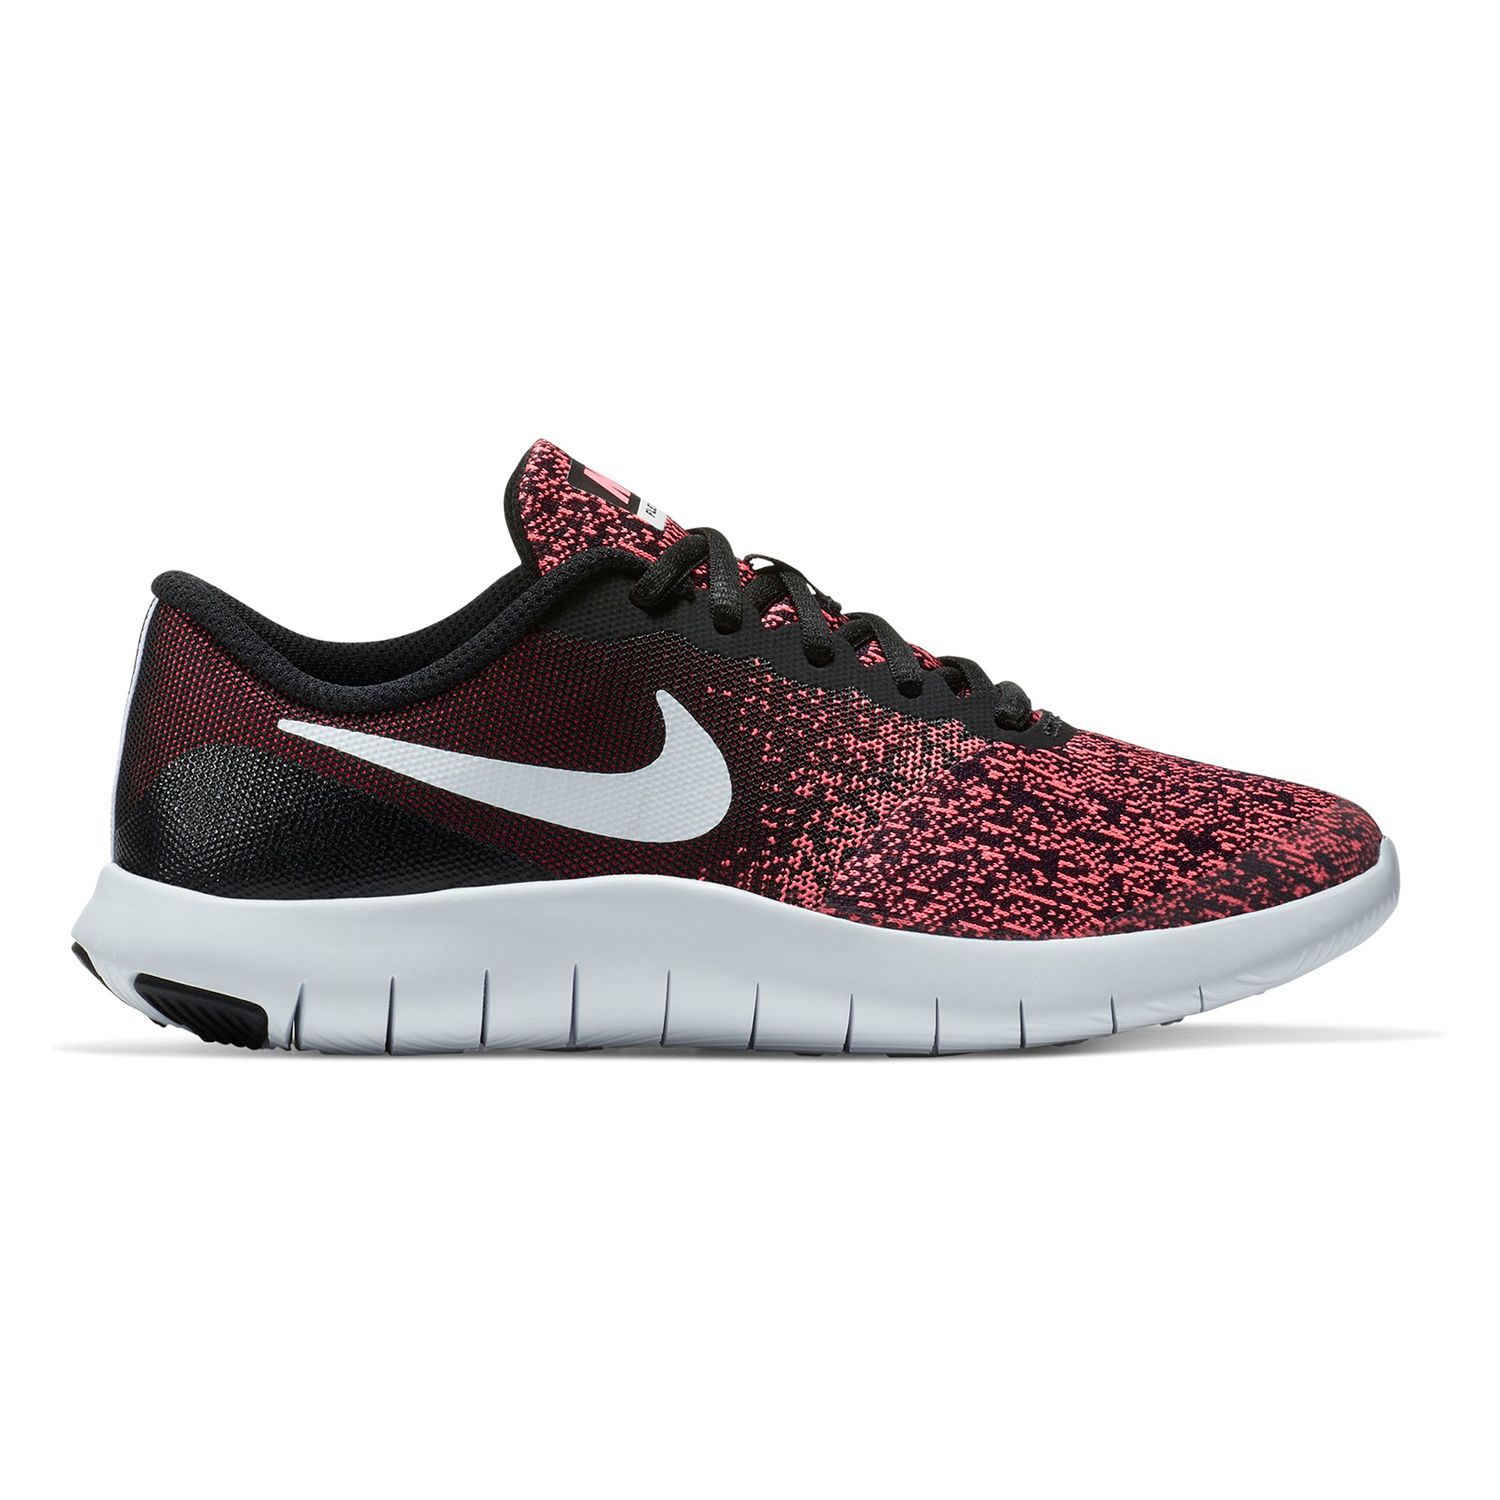 nike sports shoes for girls